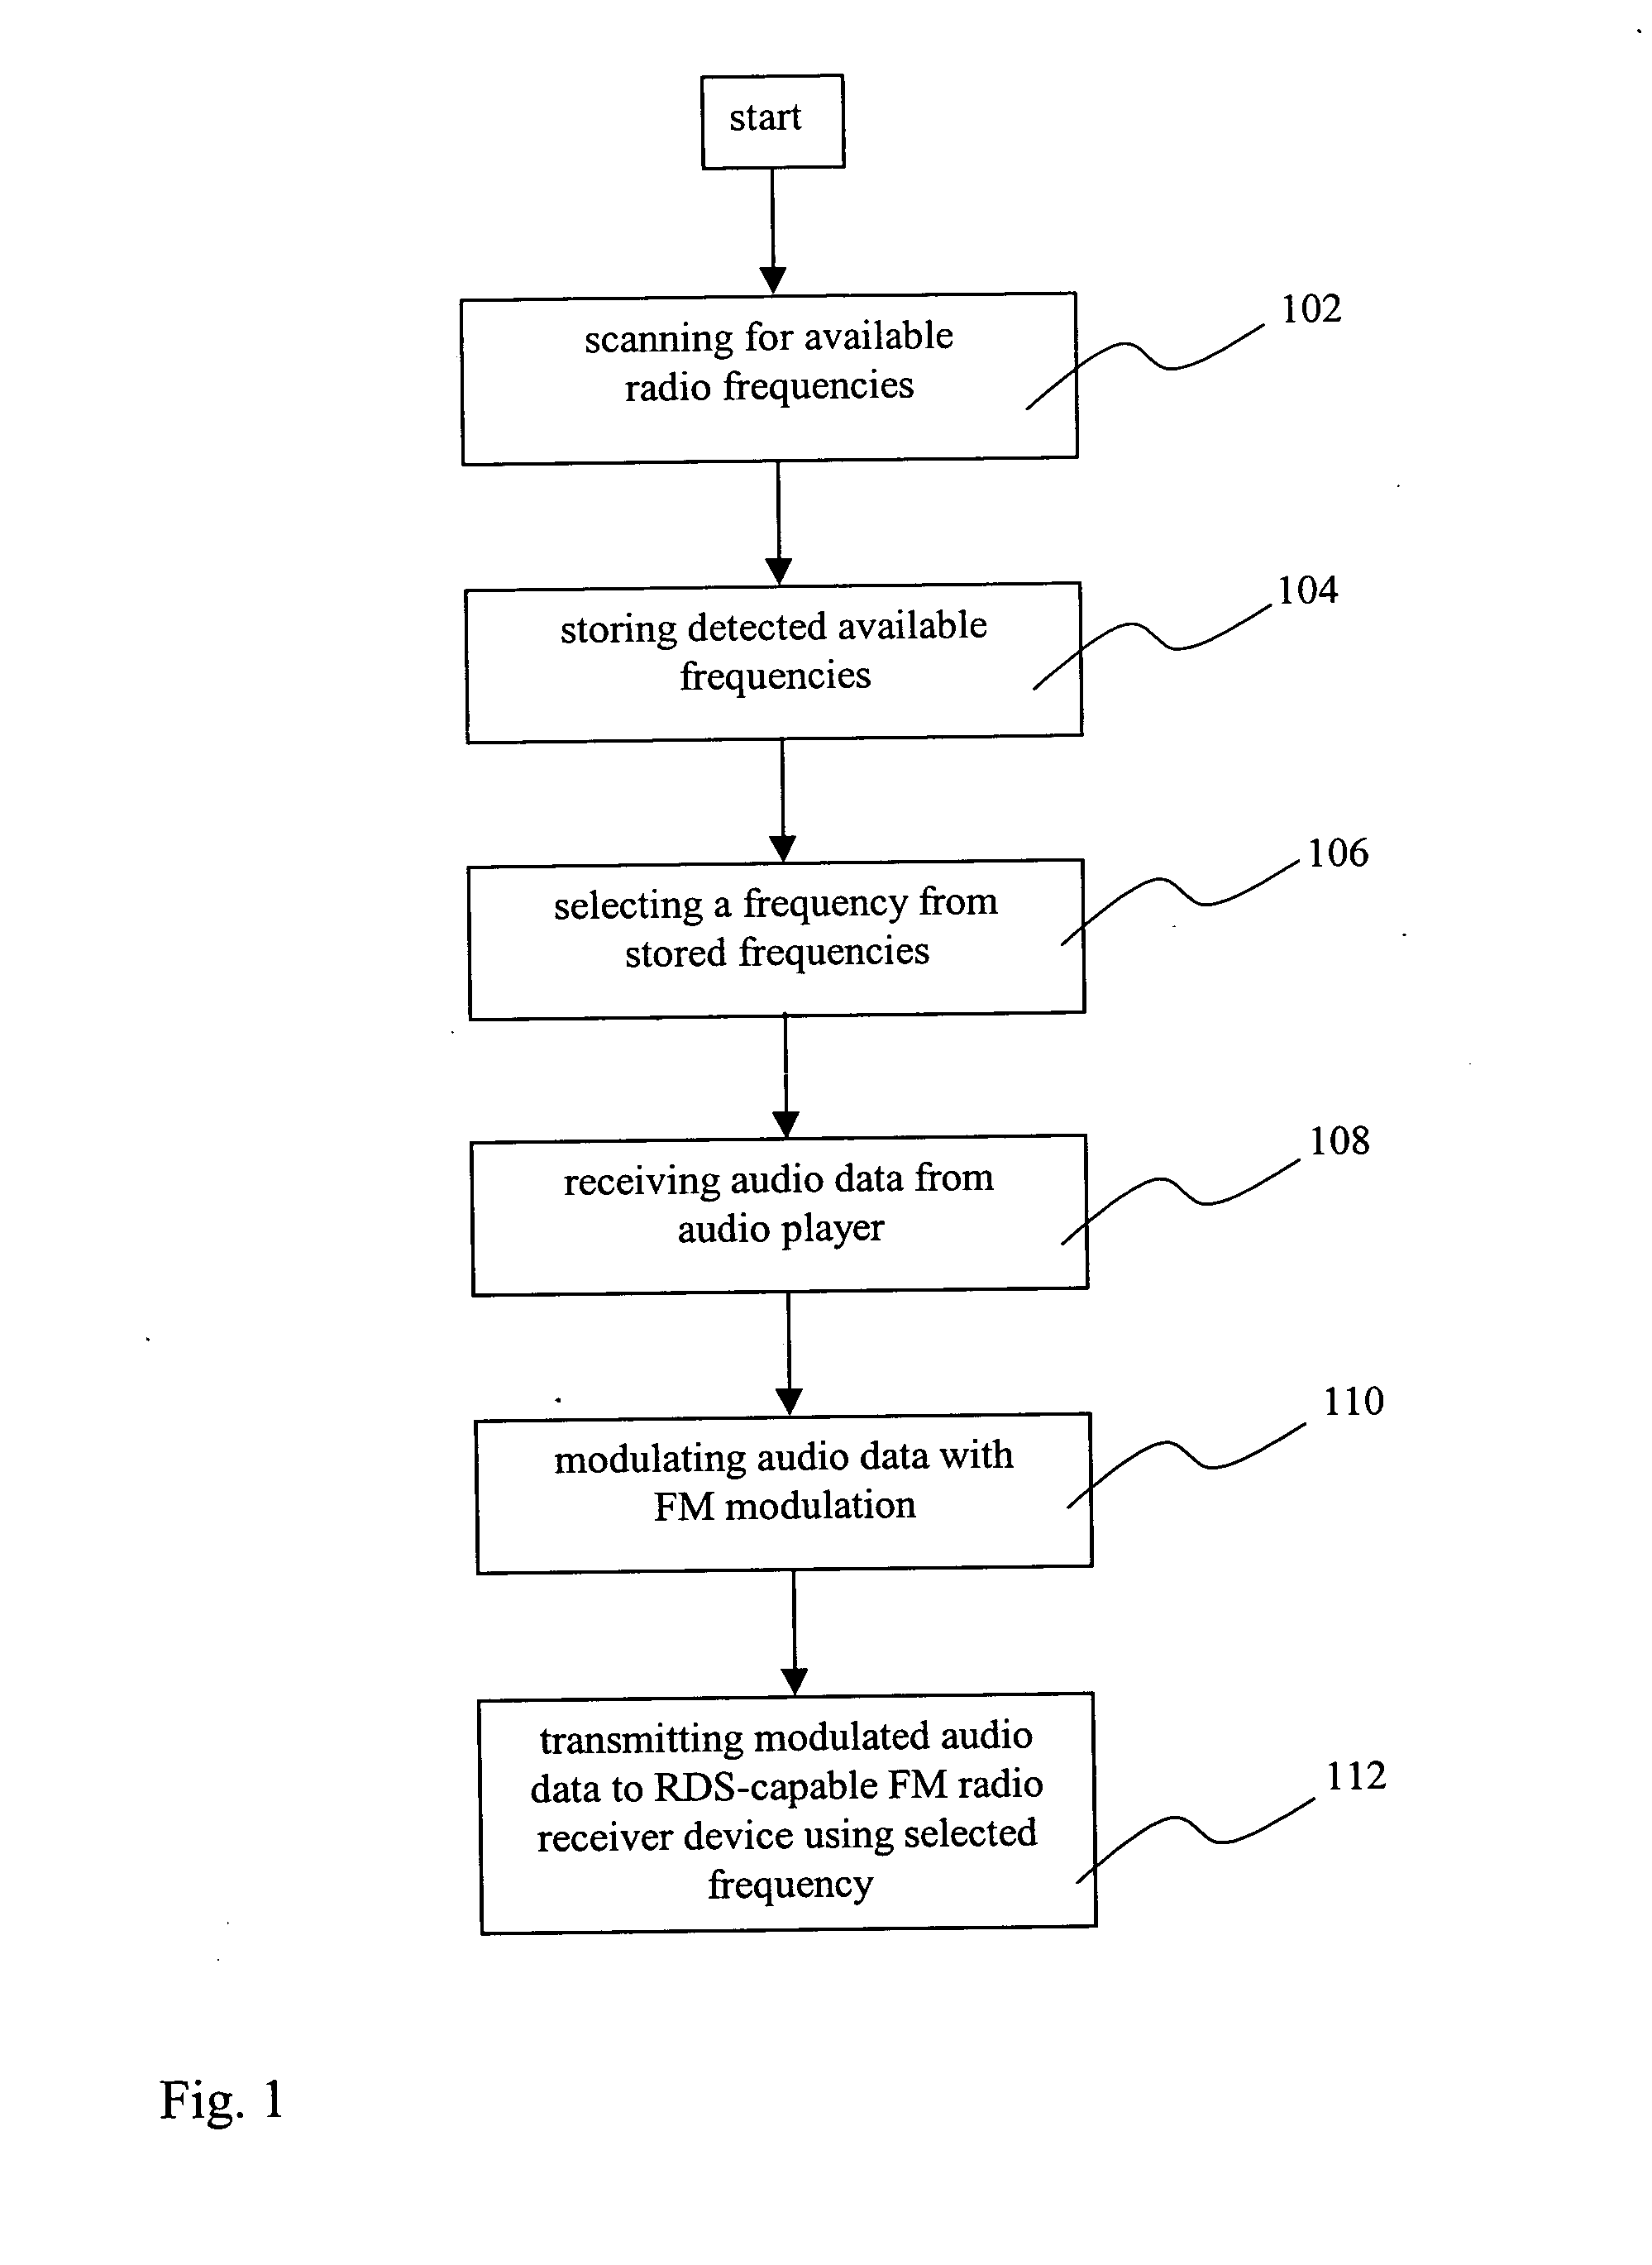 Method and device for low-power FM transmission of audio data to RDS (Radio Data System) capable FM radio receiver